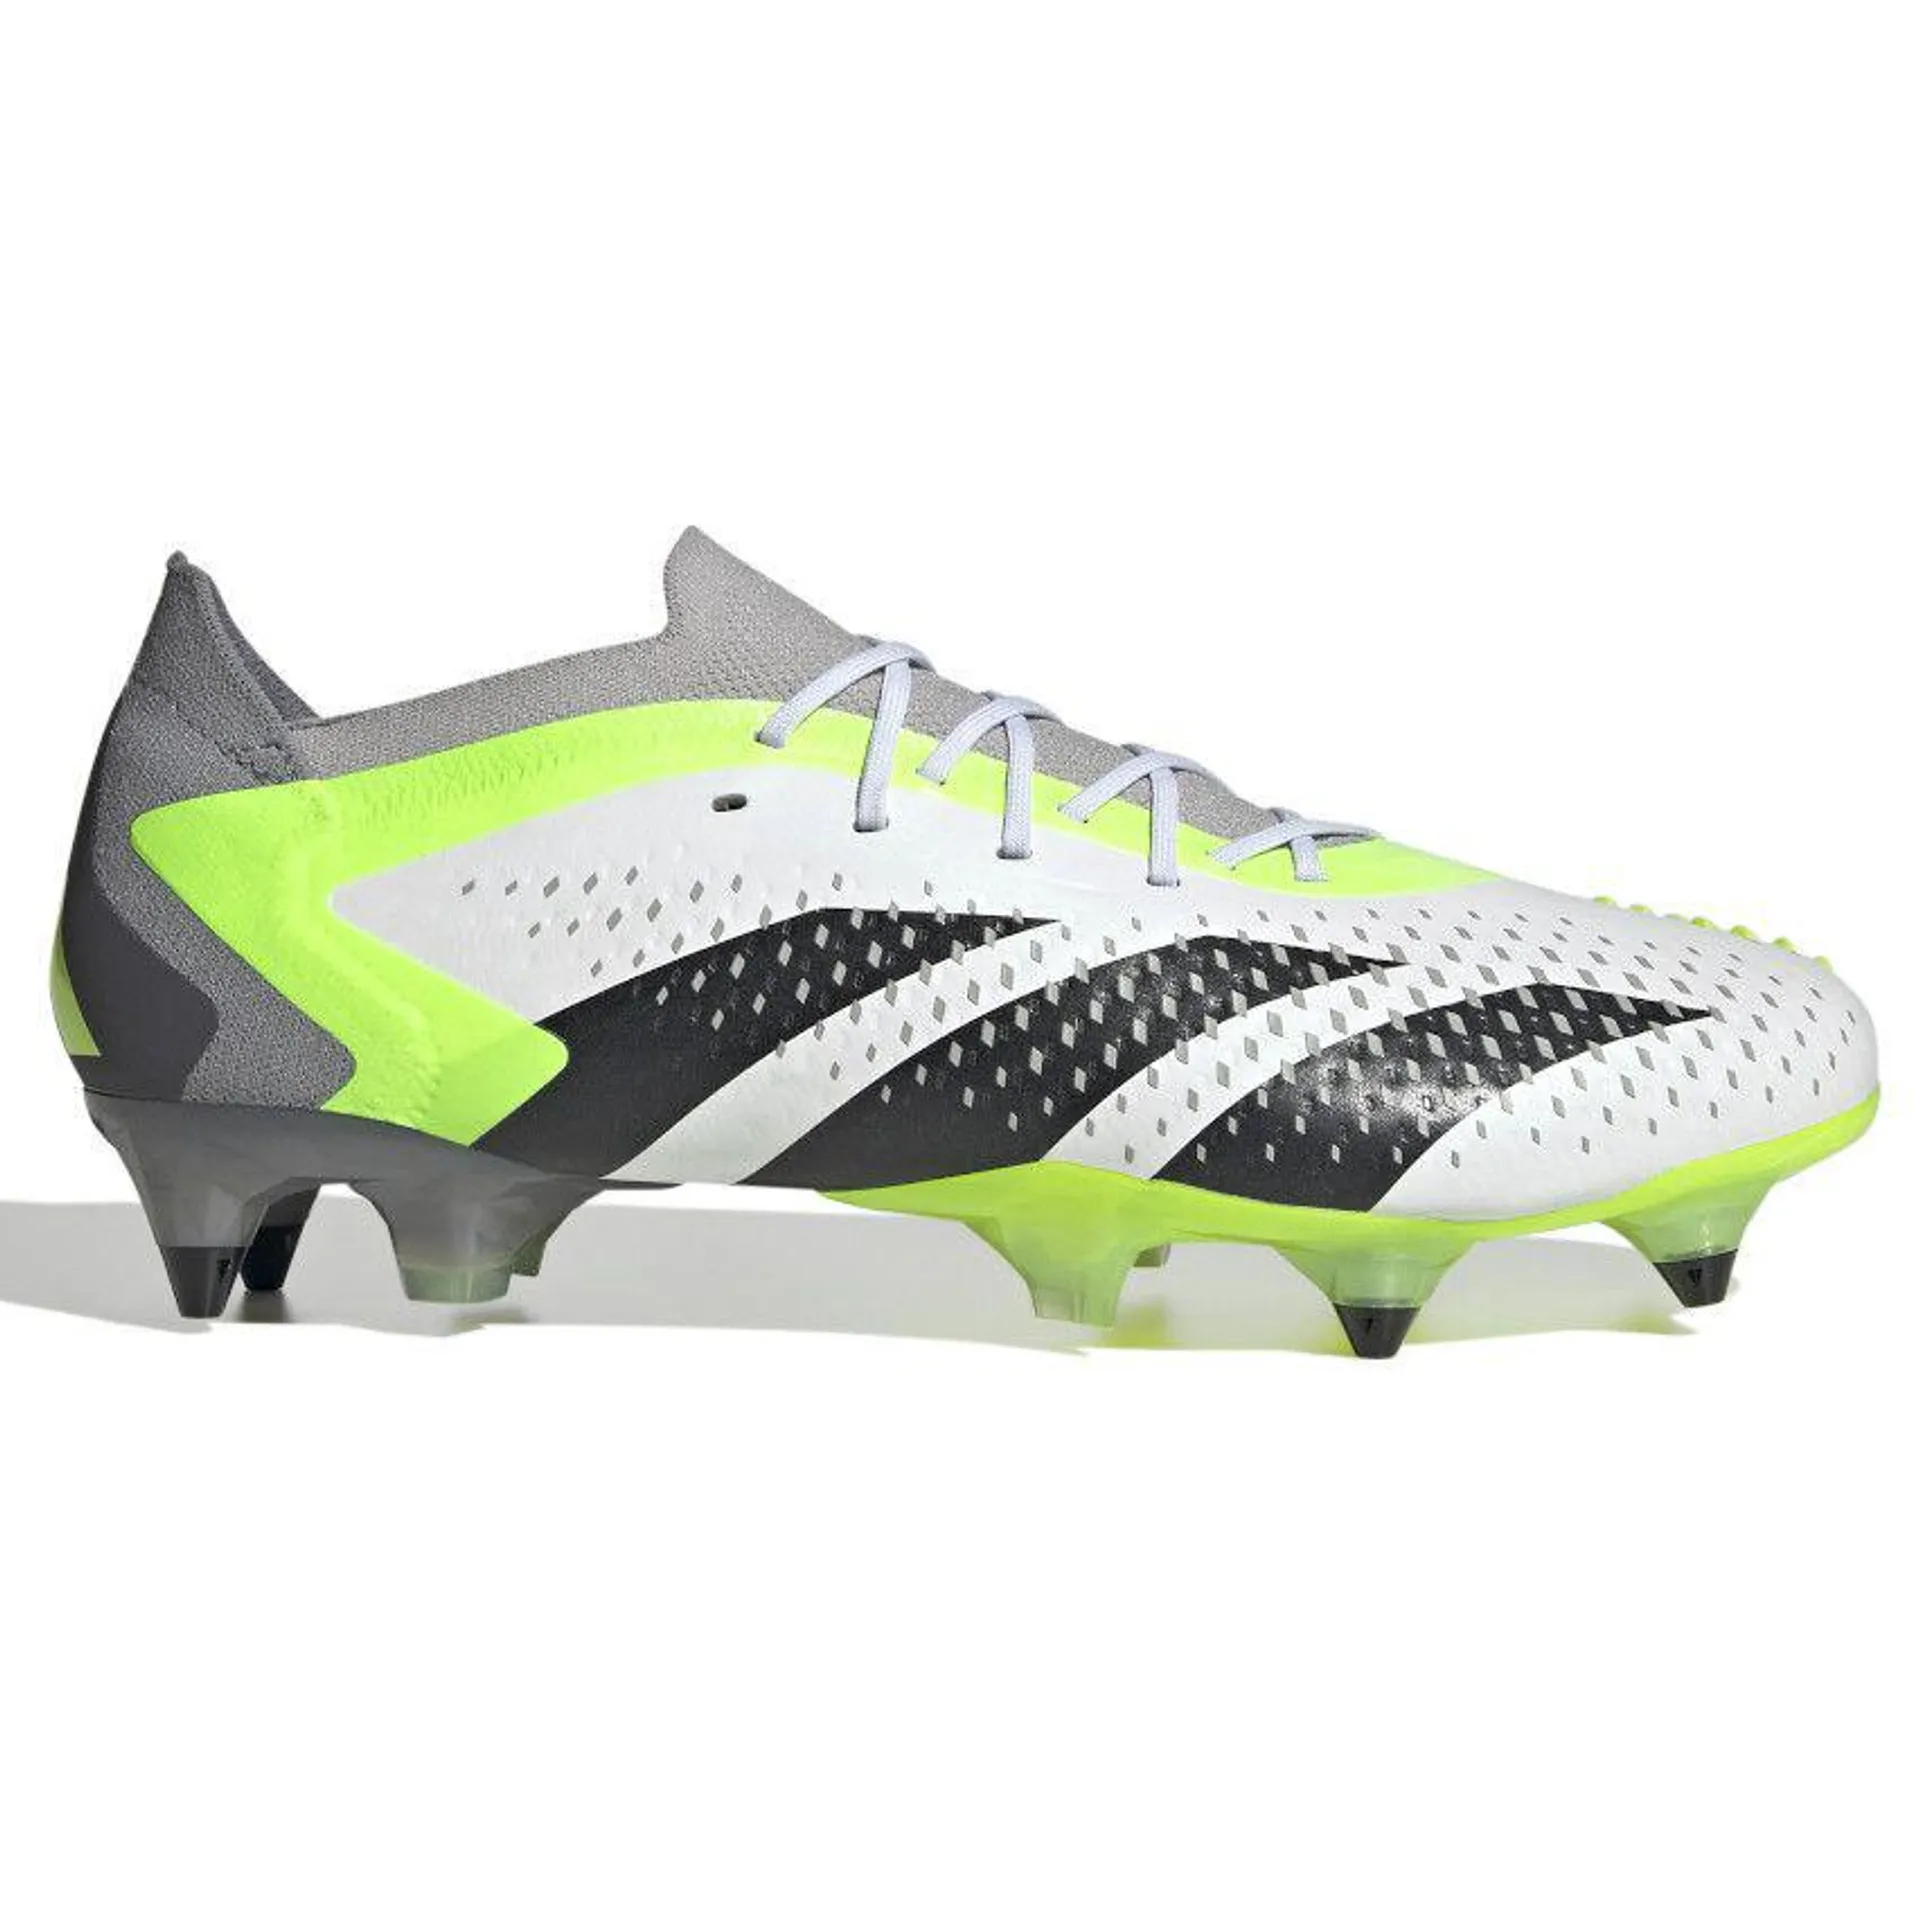 Chaussures Rugby Predator Accuracy.1 Crampons Hybrides Tout Terrain - Adidas